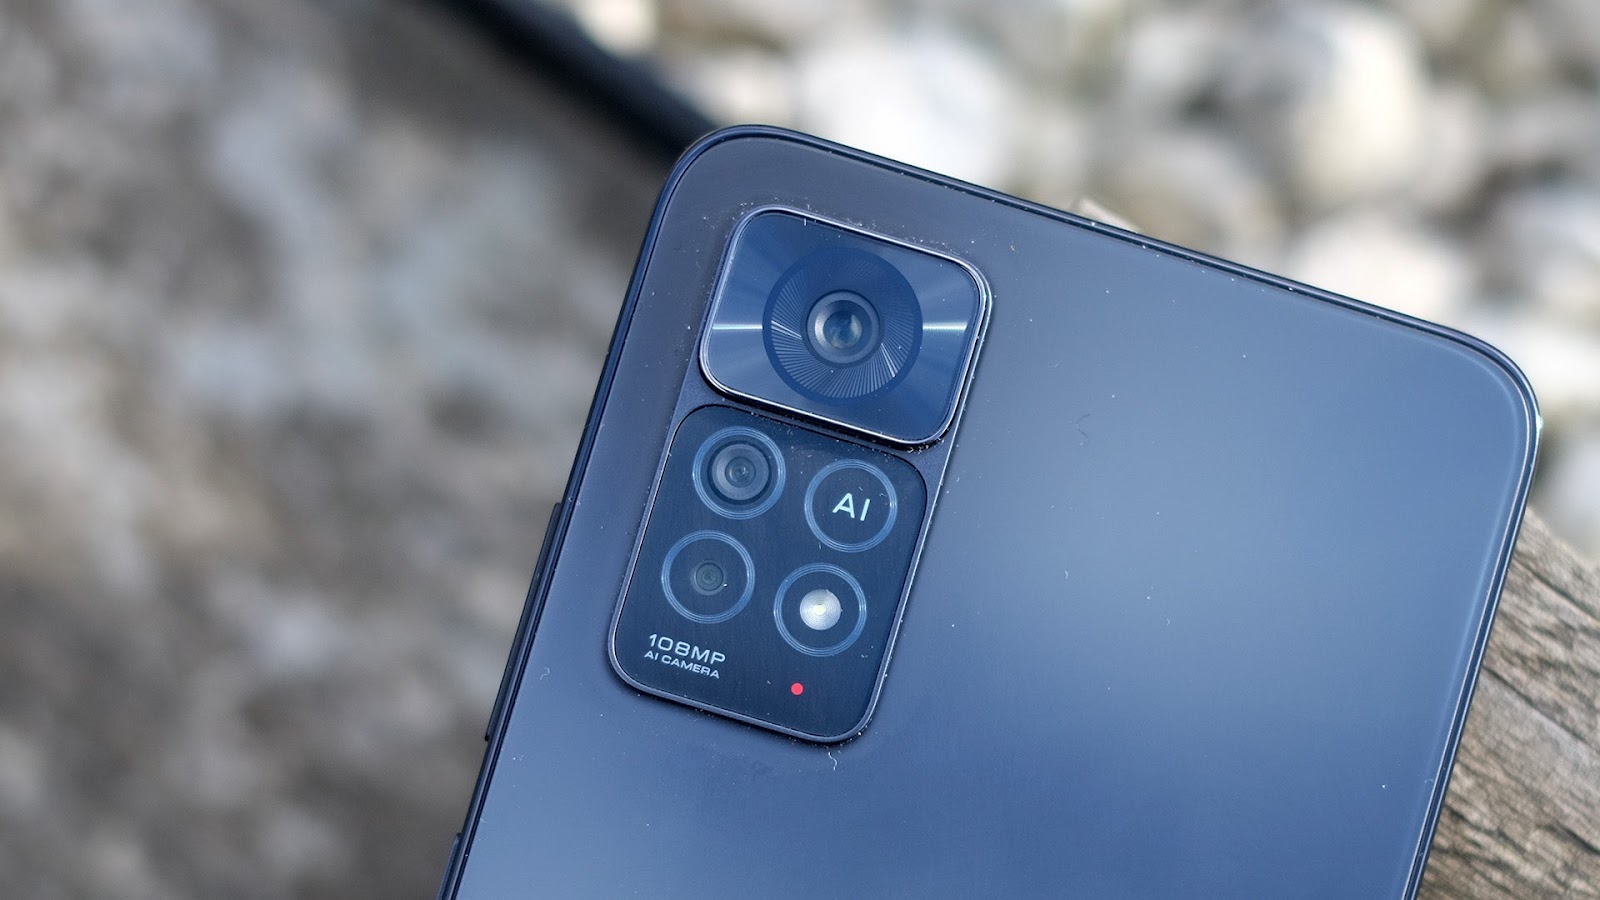 This image shows the cameras of Xiaomi Redmi Note 11 Pro+.